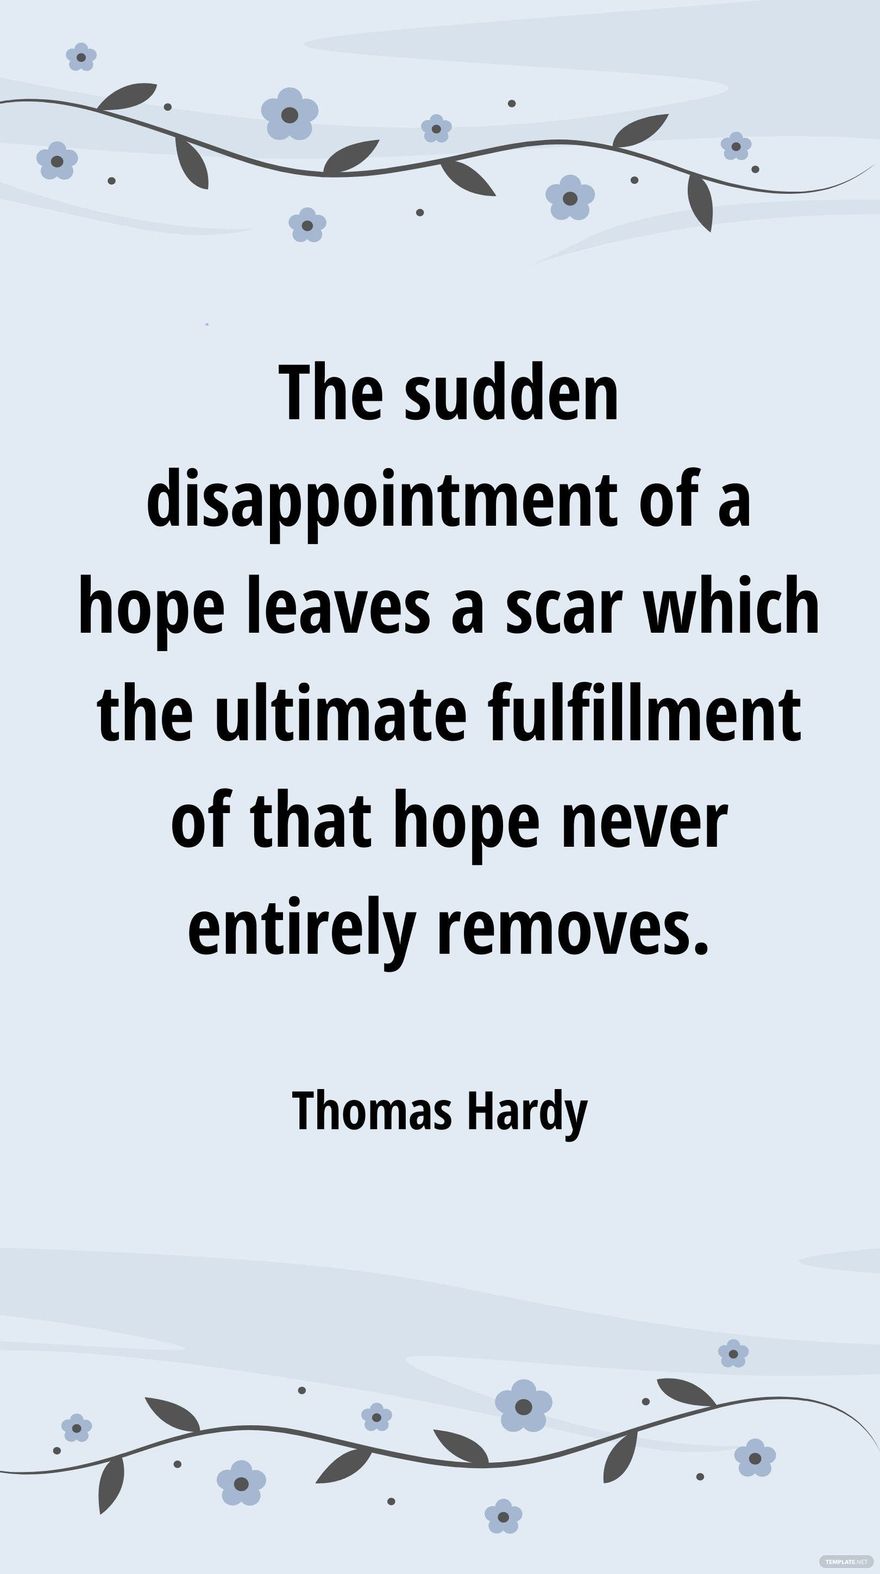 Thomas Hardy - The sudden disappointment of a hope leaves a scar which the ultimate fulfillment of that hope never entirely removes.